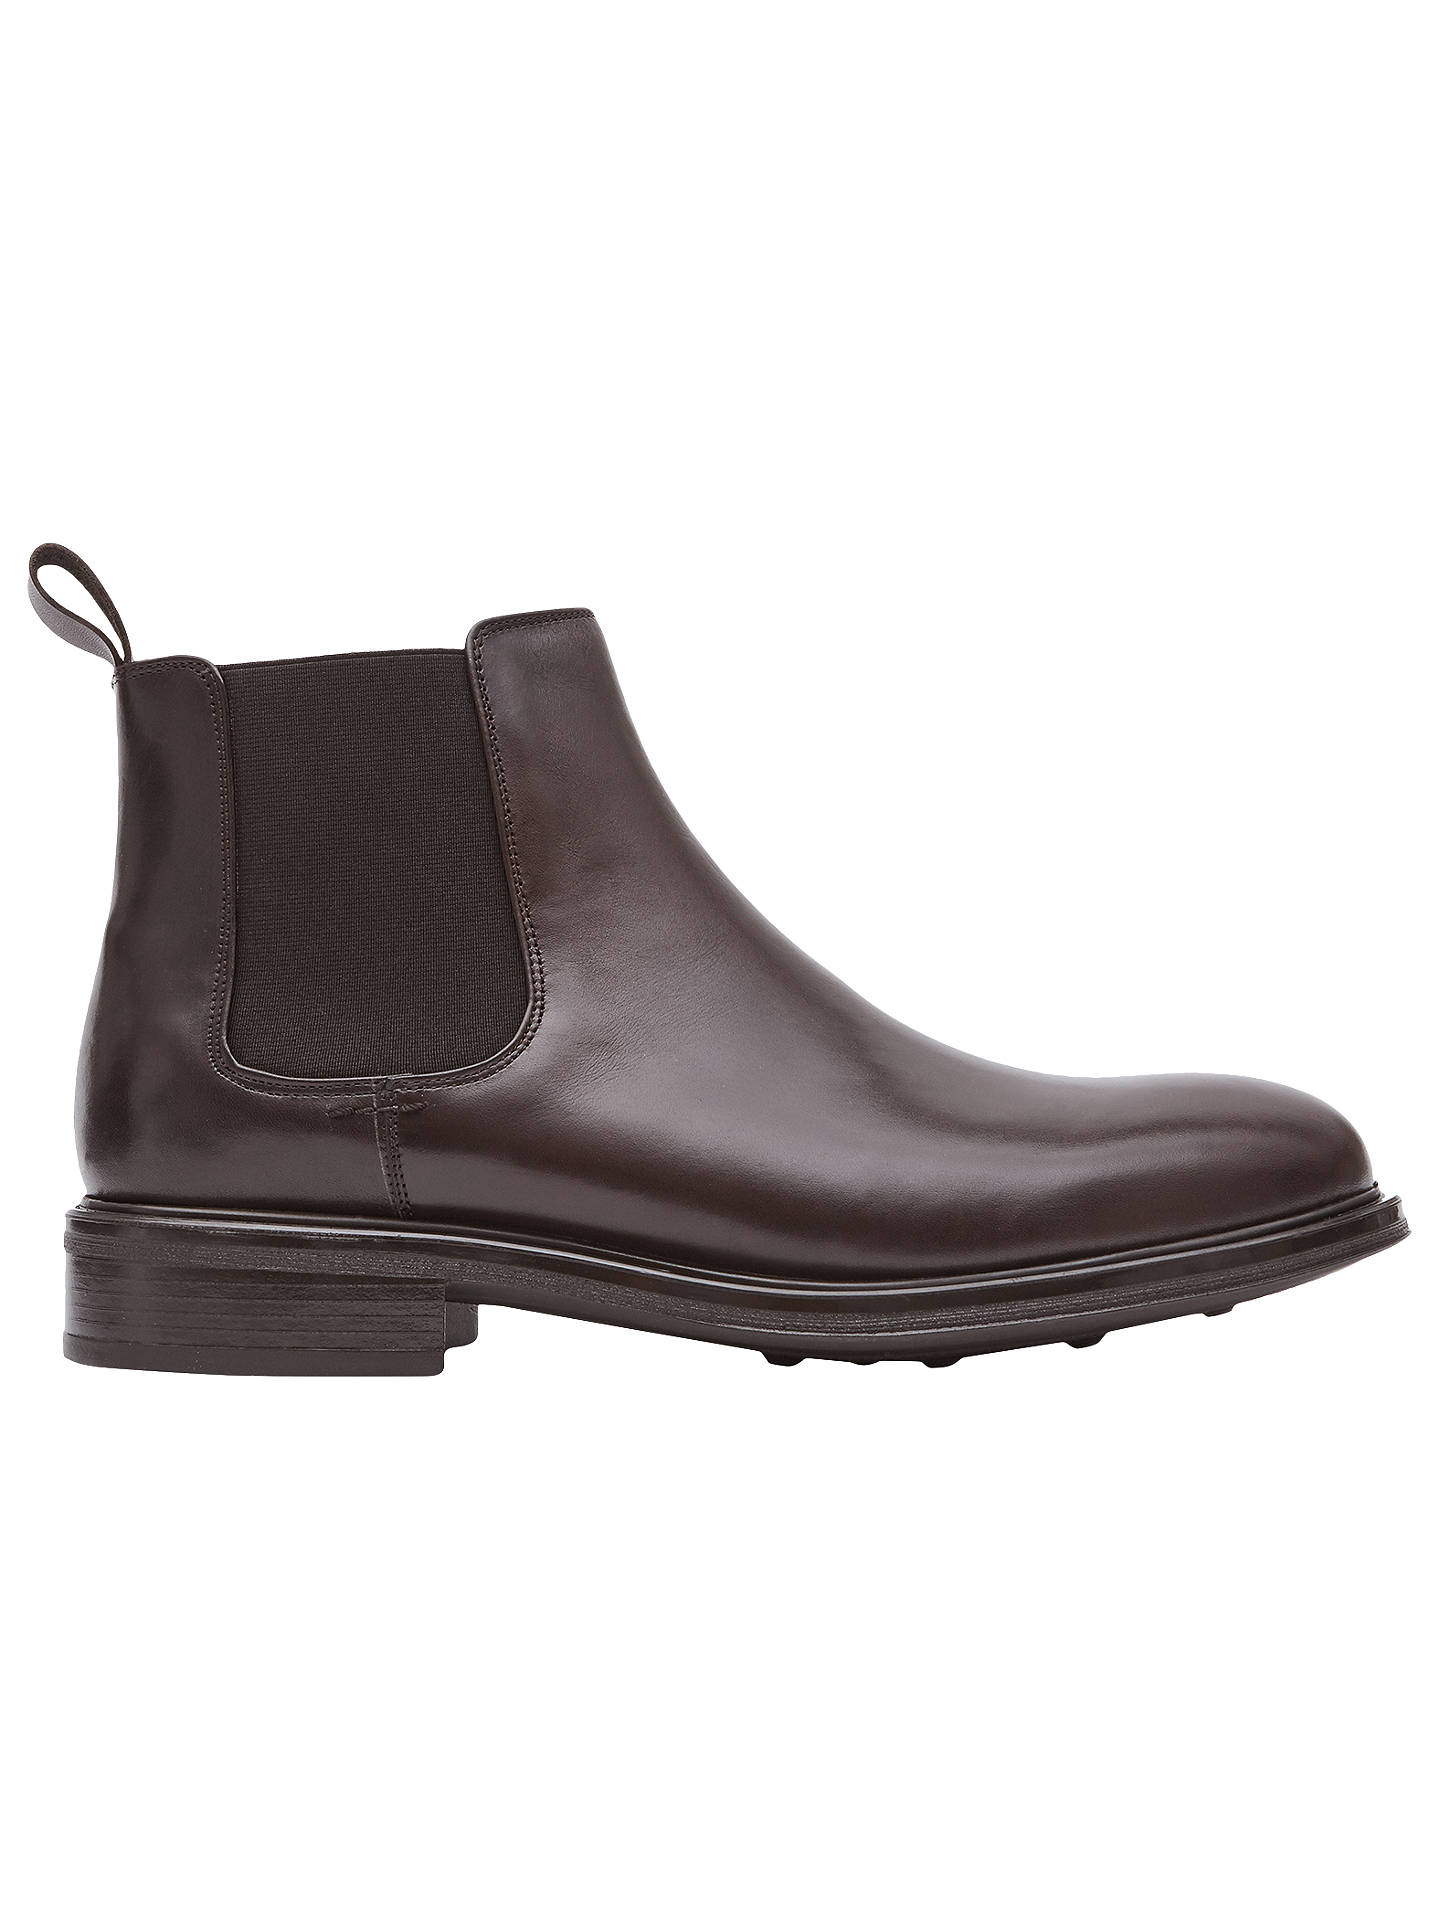 Reiss Chalmer Leather Chelsea Boots, Dark Brown at John Lewis & Partners